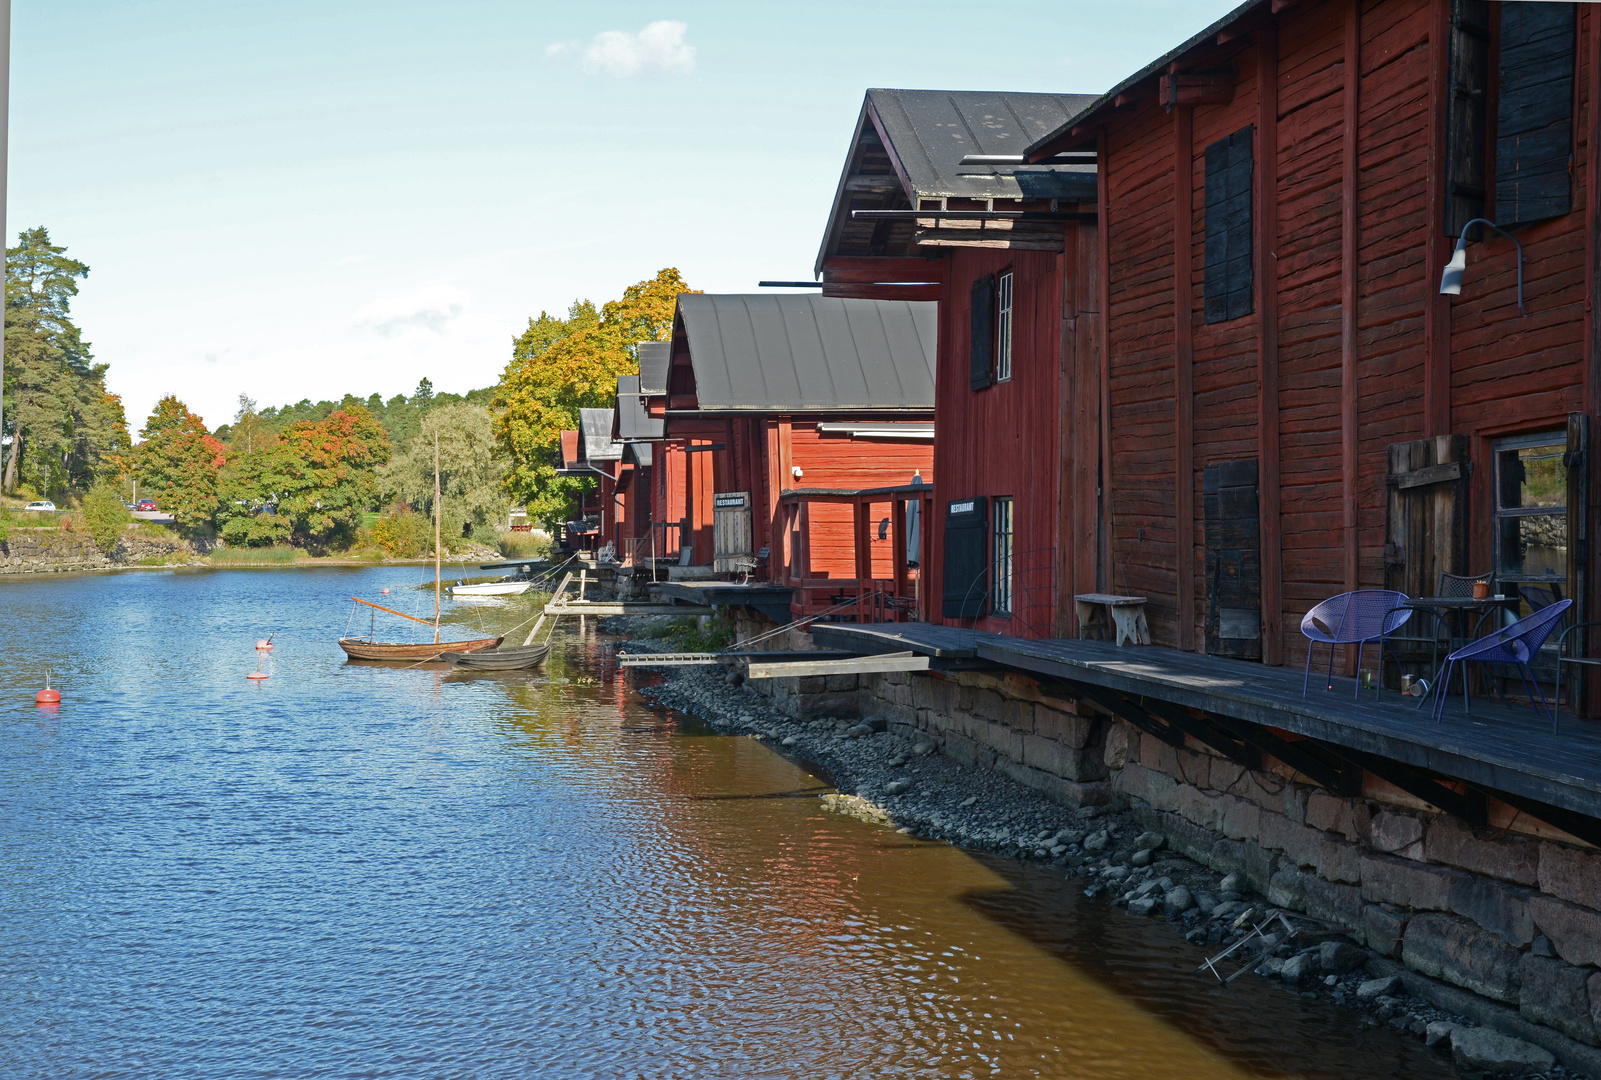 The old warehouse on Porvoo